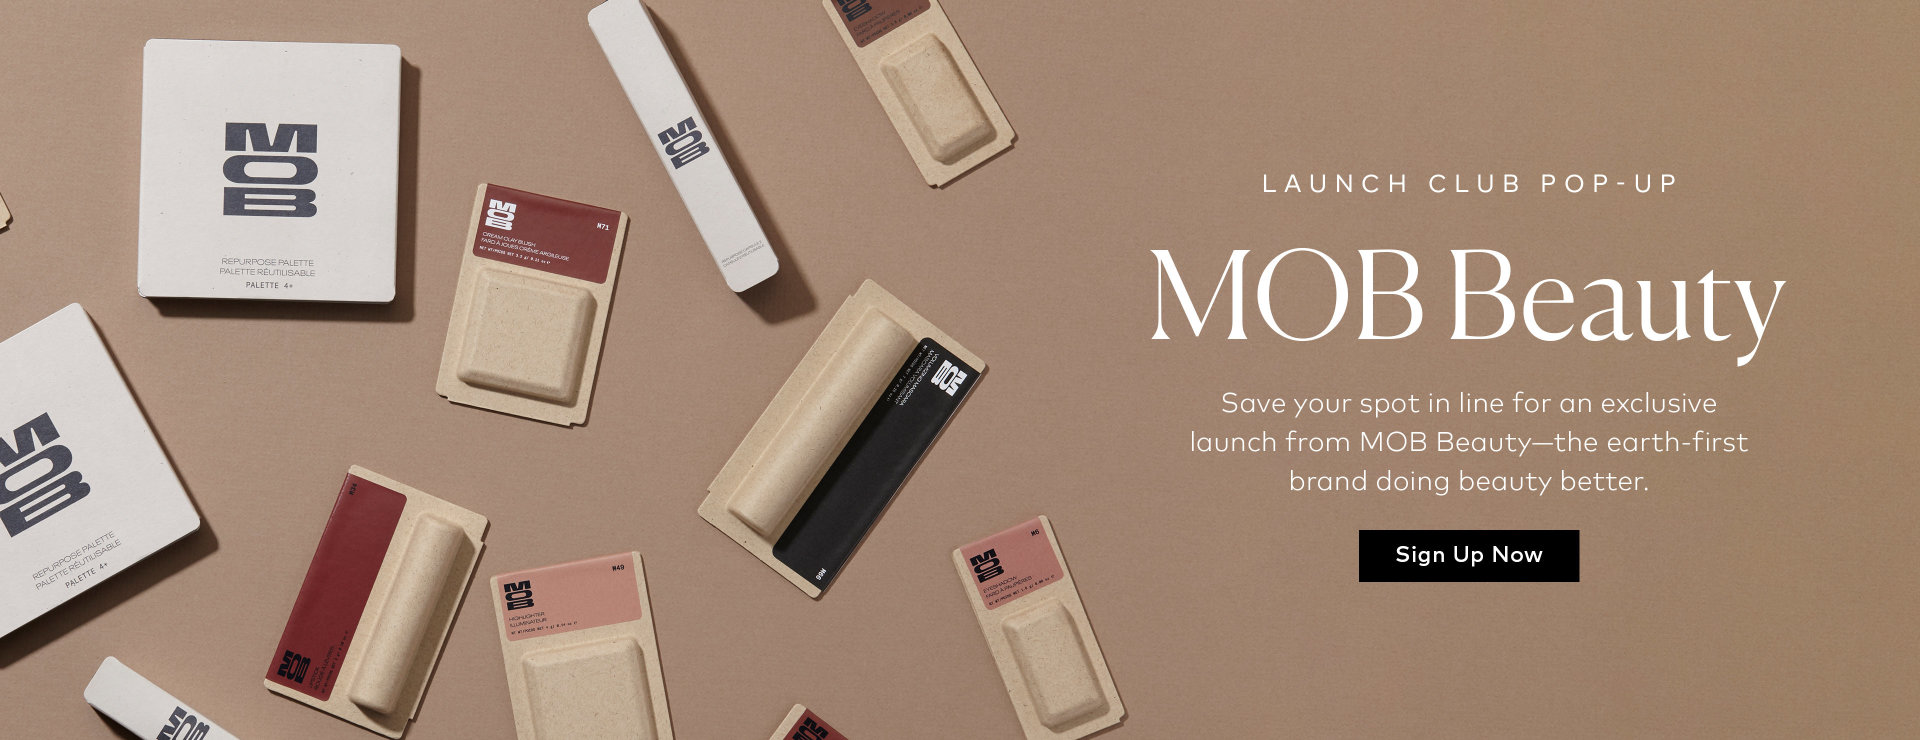 Sign up to receive notifications about the exclusive MOB Beauty Launch.